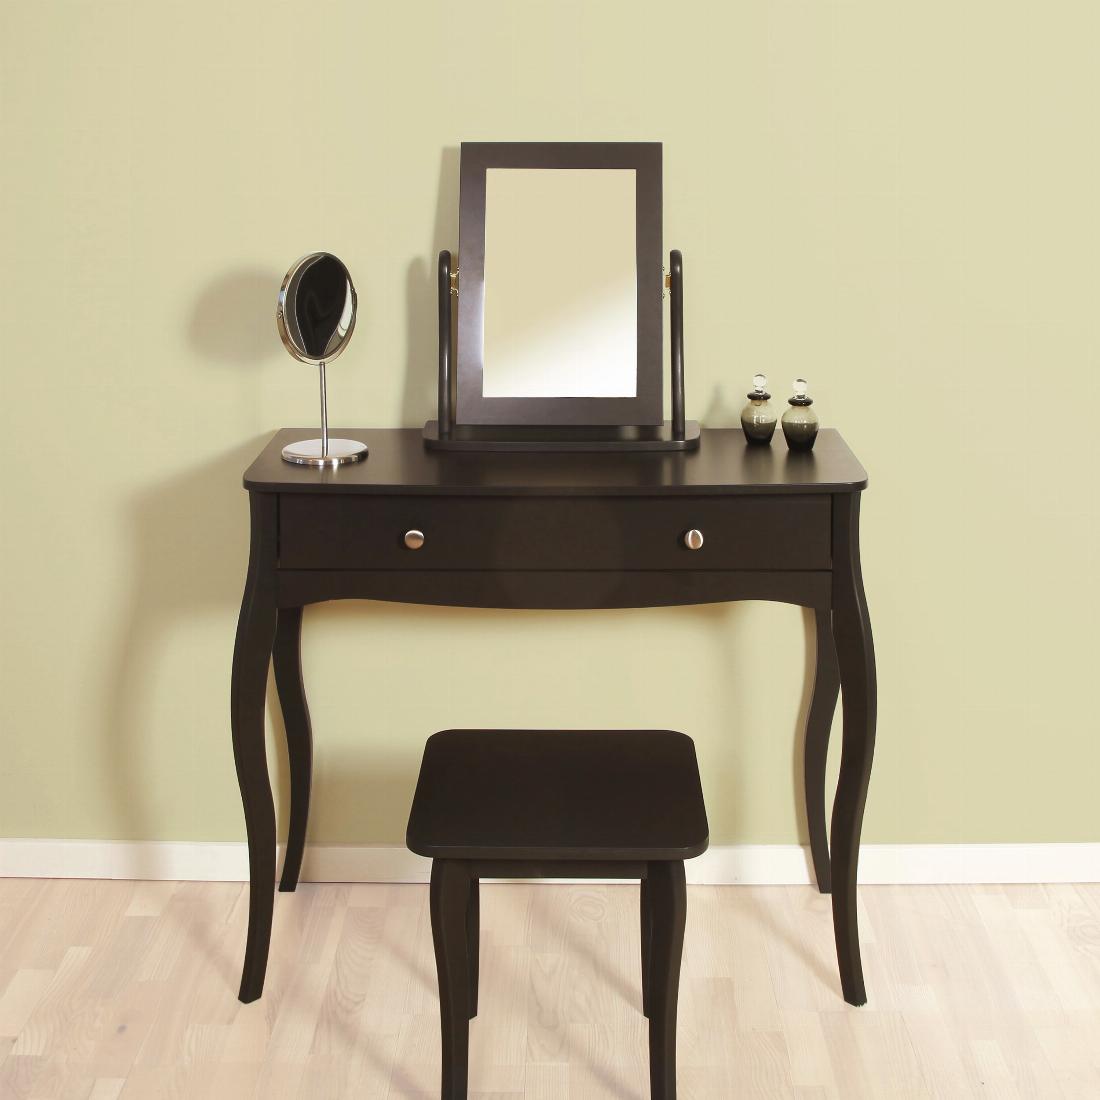 Baroque 1 Drw Vanity included Stool and Mirror Black